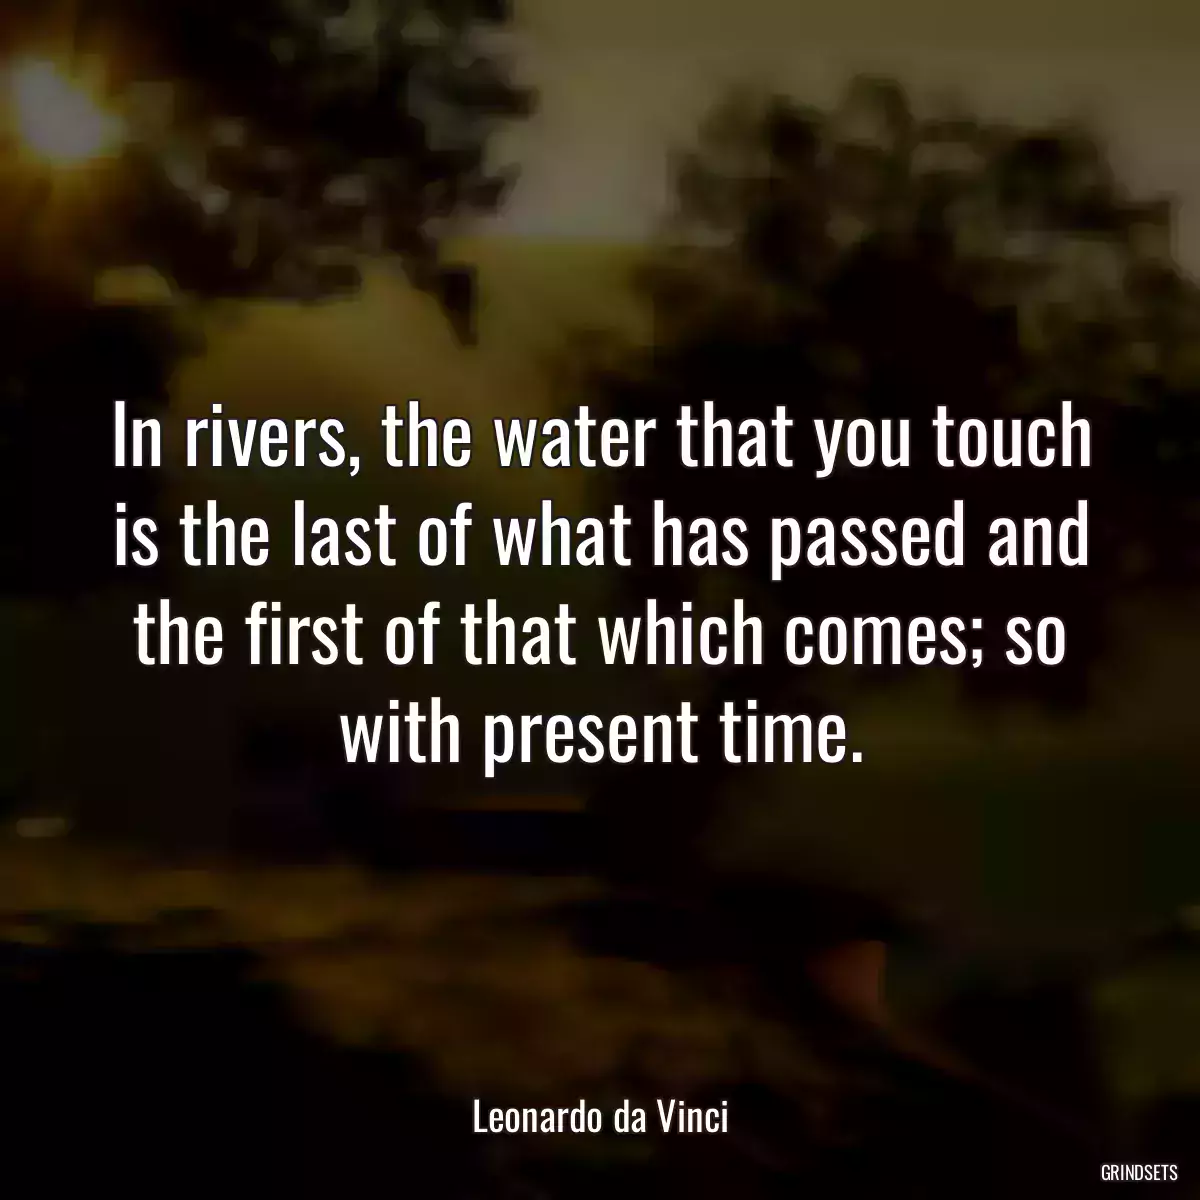 In rivers, the water that you touch is the last of what has passed and the first of that which comes; so with present time.